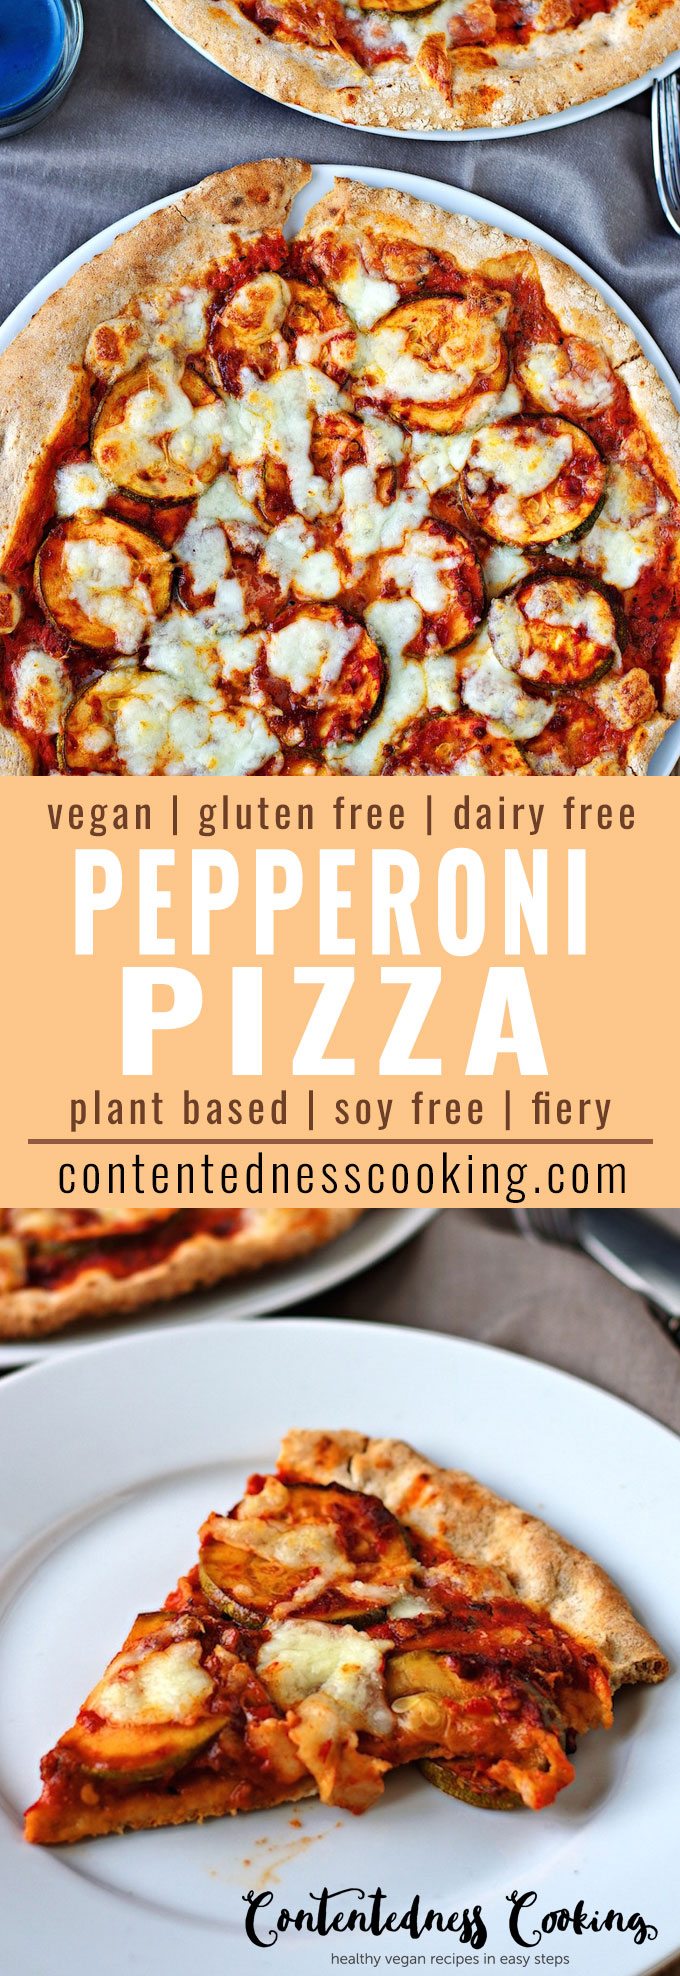 Collage of two pictures of the Vegan Pepperoni Pizza with recipe title text.